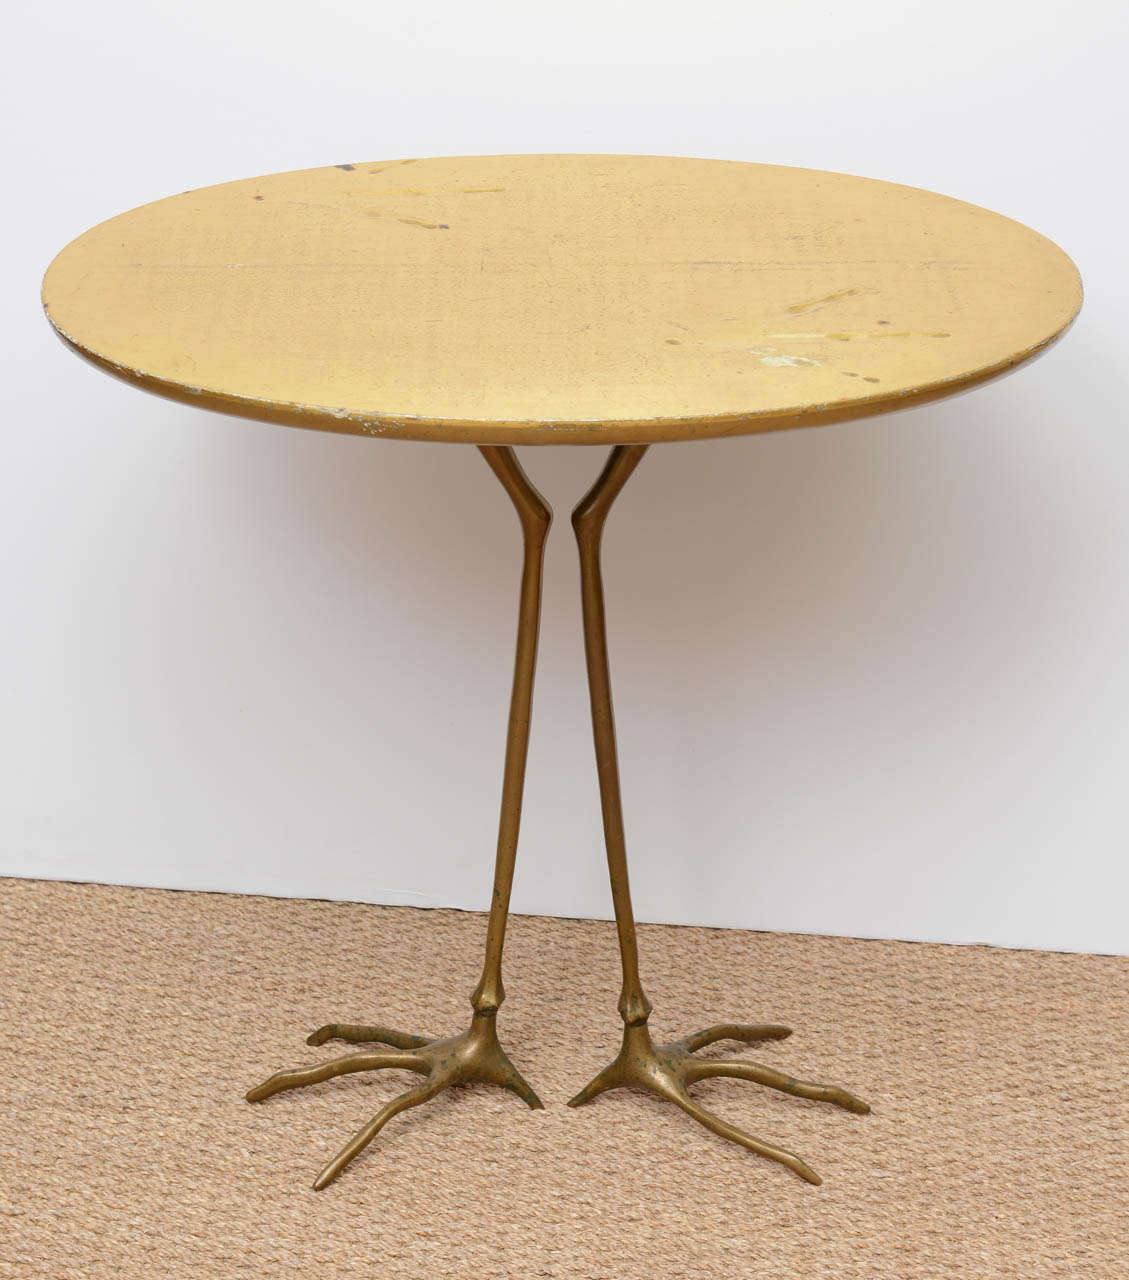 Pedestal table "Traccia" by the Swiss designer Meret Oppenheim.
An oval shaped, gold giltwood top featuring bird footprints, on top of cast bronze chicken legs.
Design originally from 1939 and manufactured by Dino Gavina in 1972.